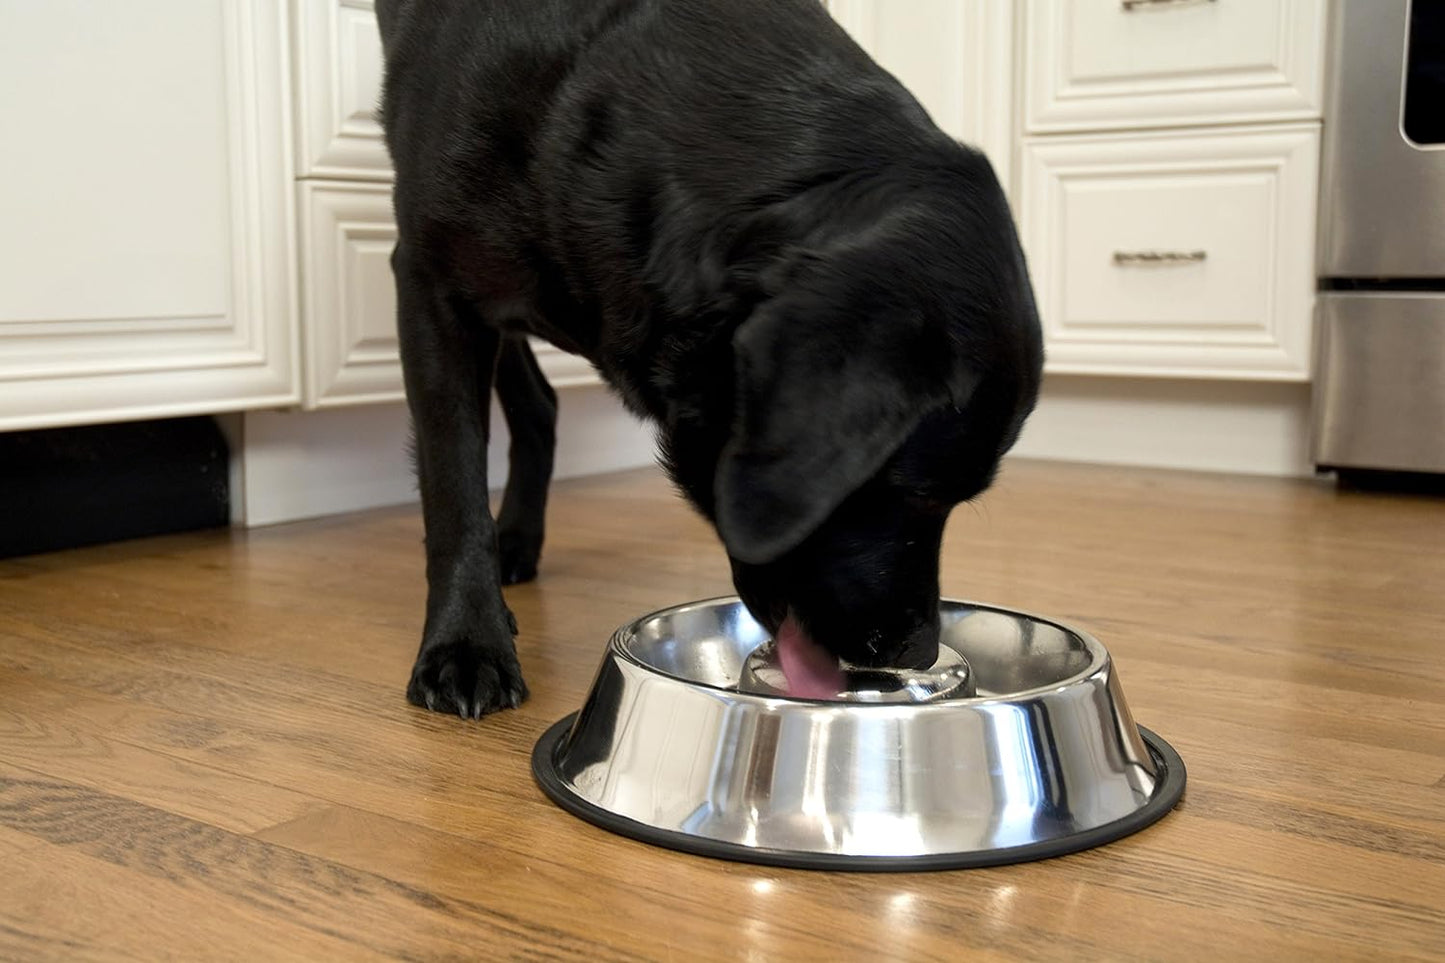 Slow Feed Stainless Steel Pet Bowl for Dog or Cat